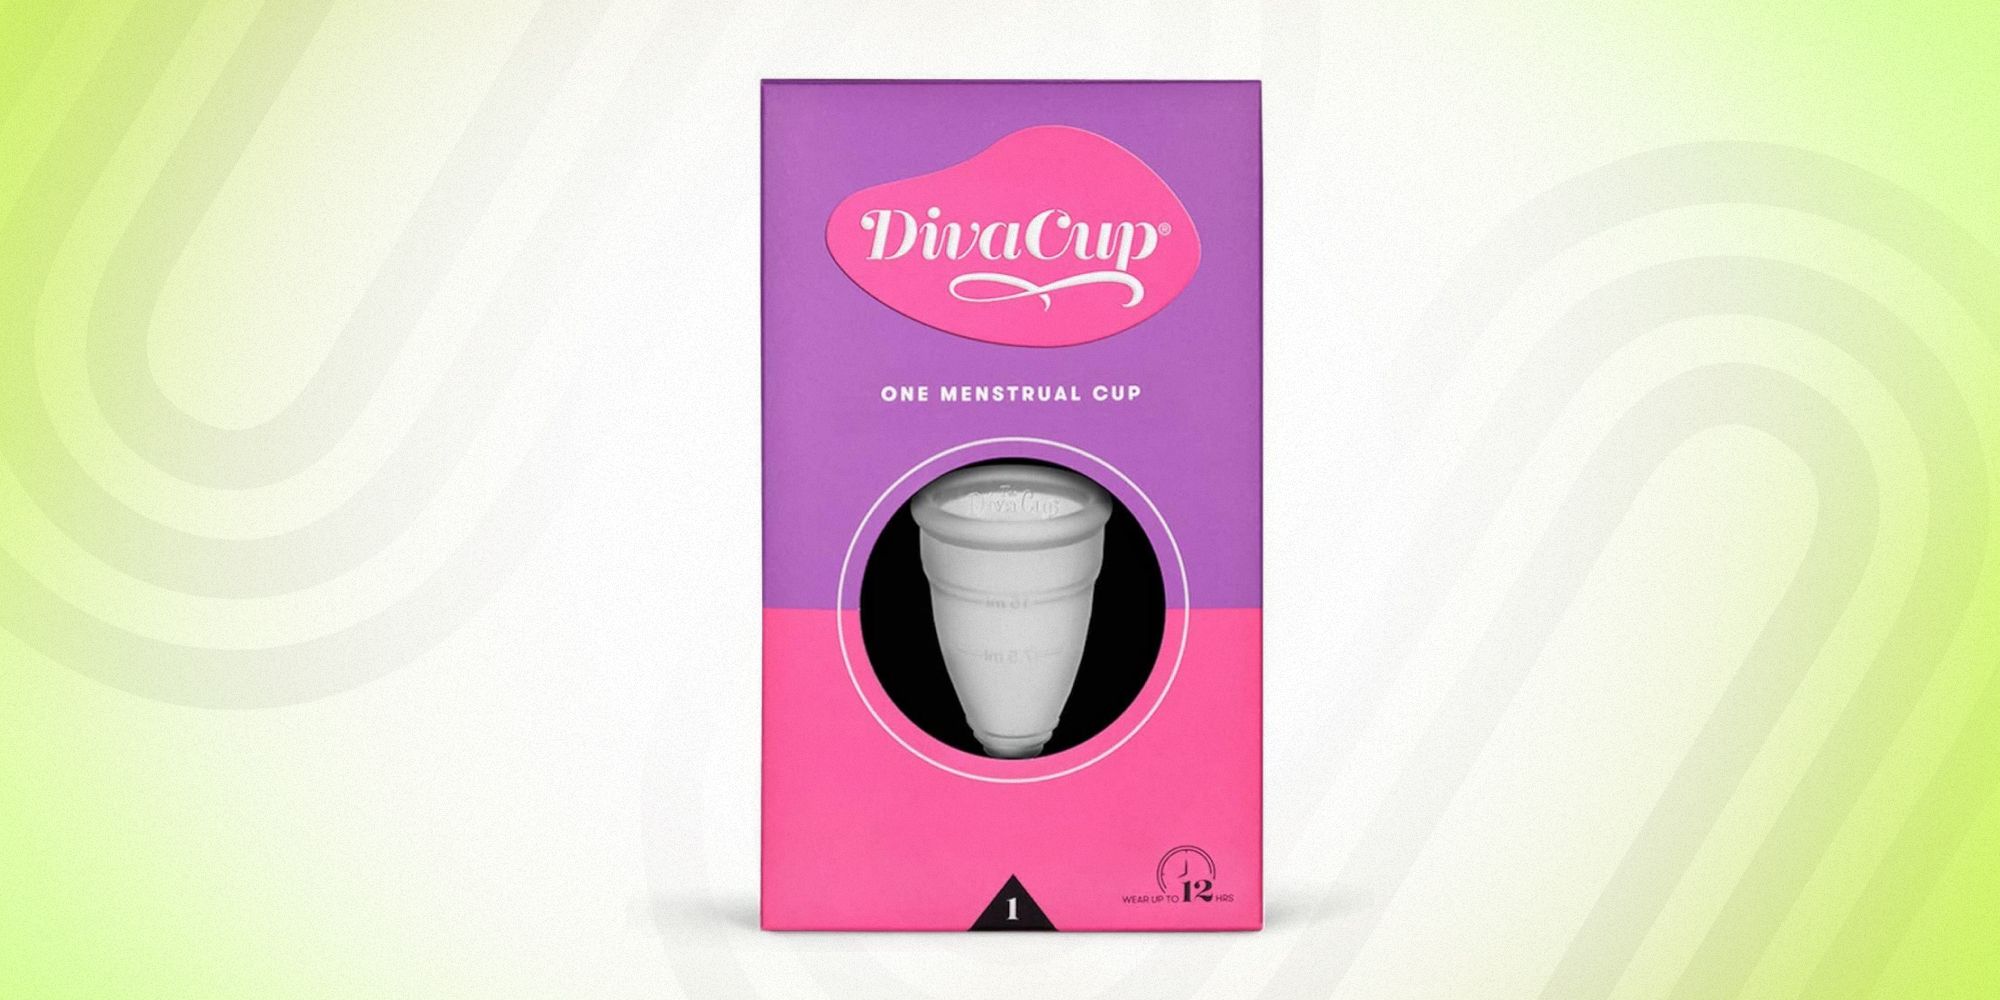  Flex Cup Starter Kit (Slim Fit - Size 01), Reusable Menstrual  Cup + 2 Free Menstrual Discs, Pull-Tab for Easy Removal, Tampon + Pad  Alternative